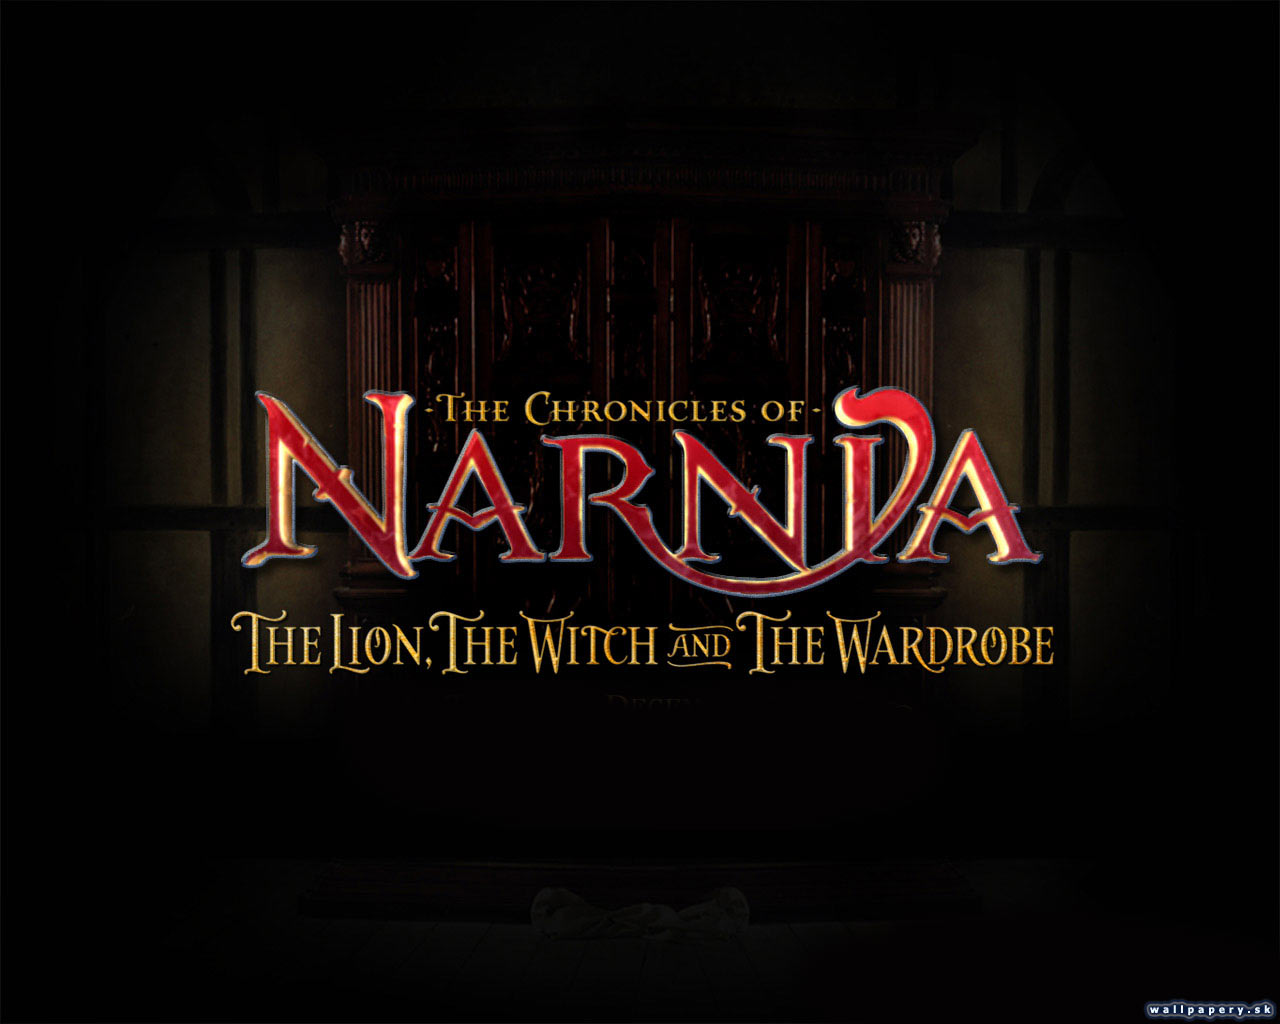 The Chronicles of Narnia: The Lion, The Witch and the Wardrobe - wallpaper 19